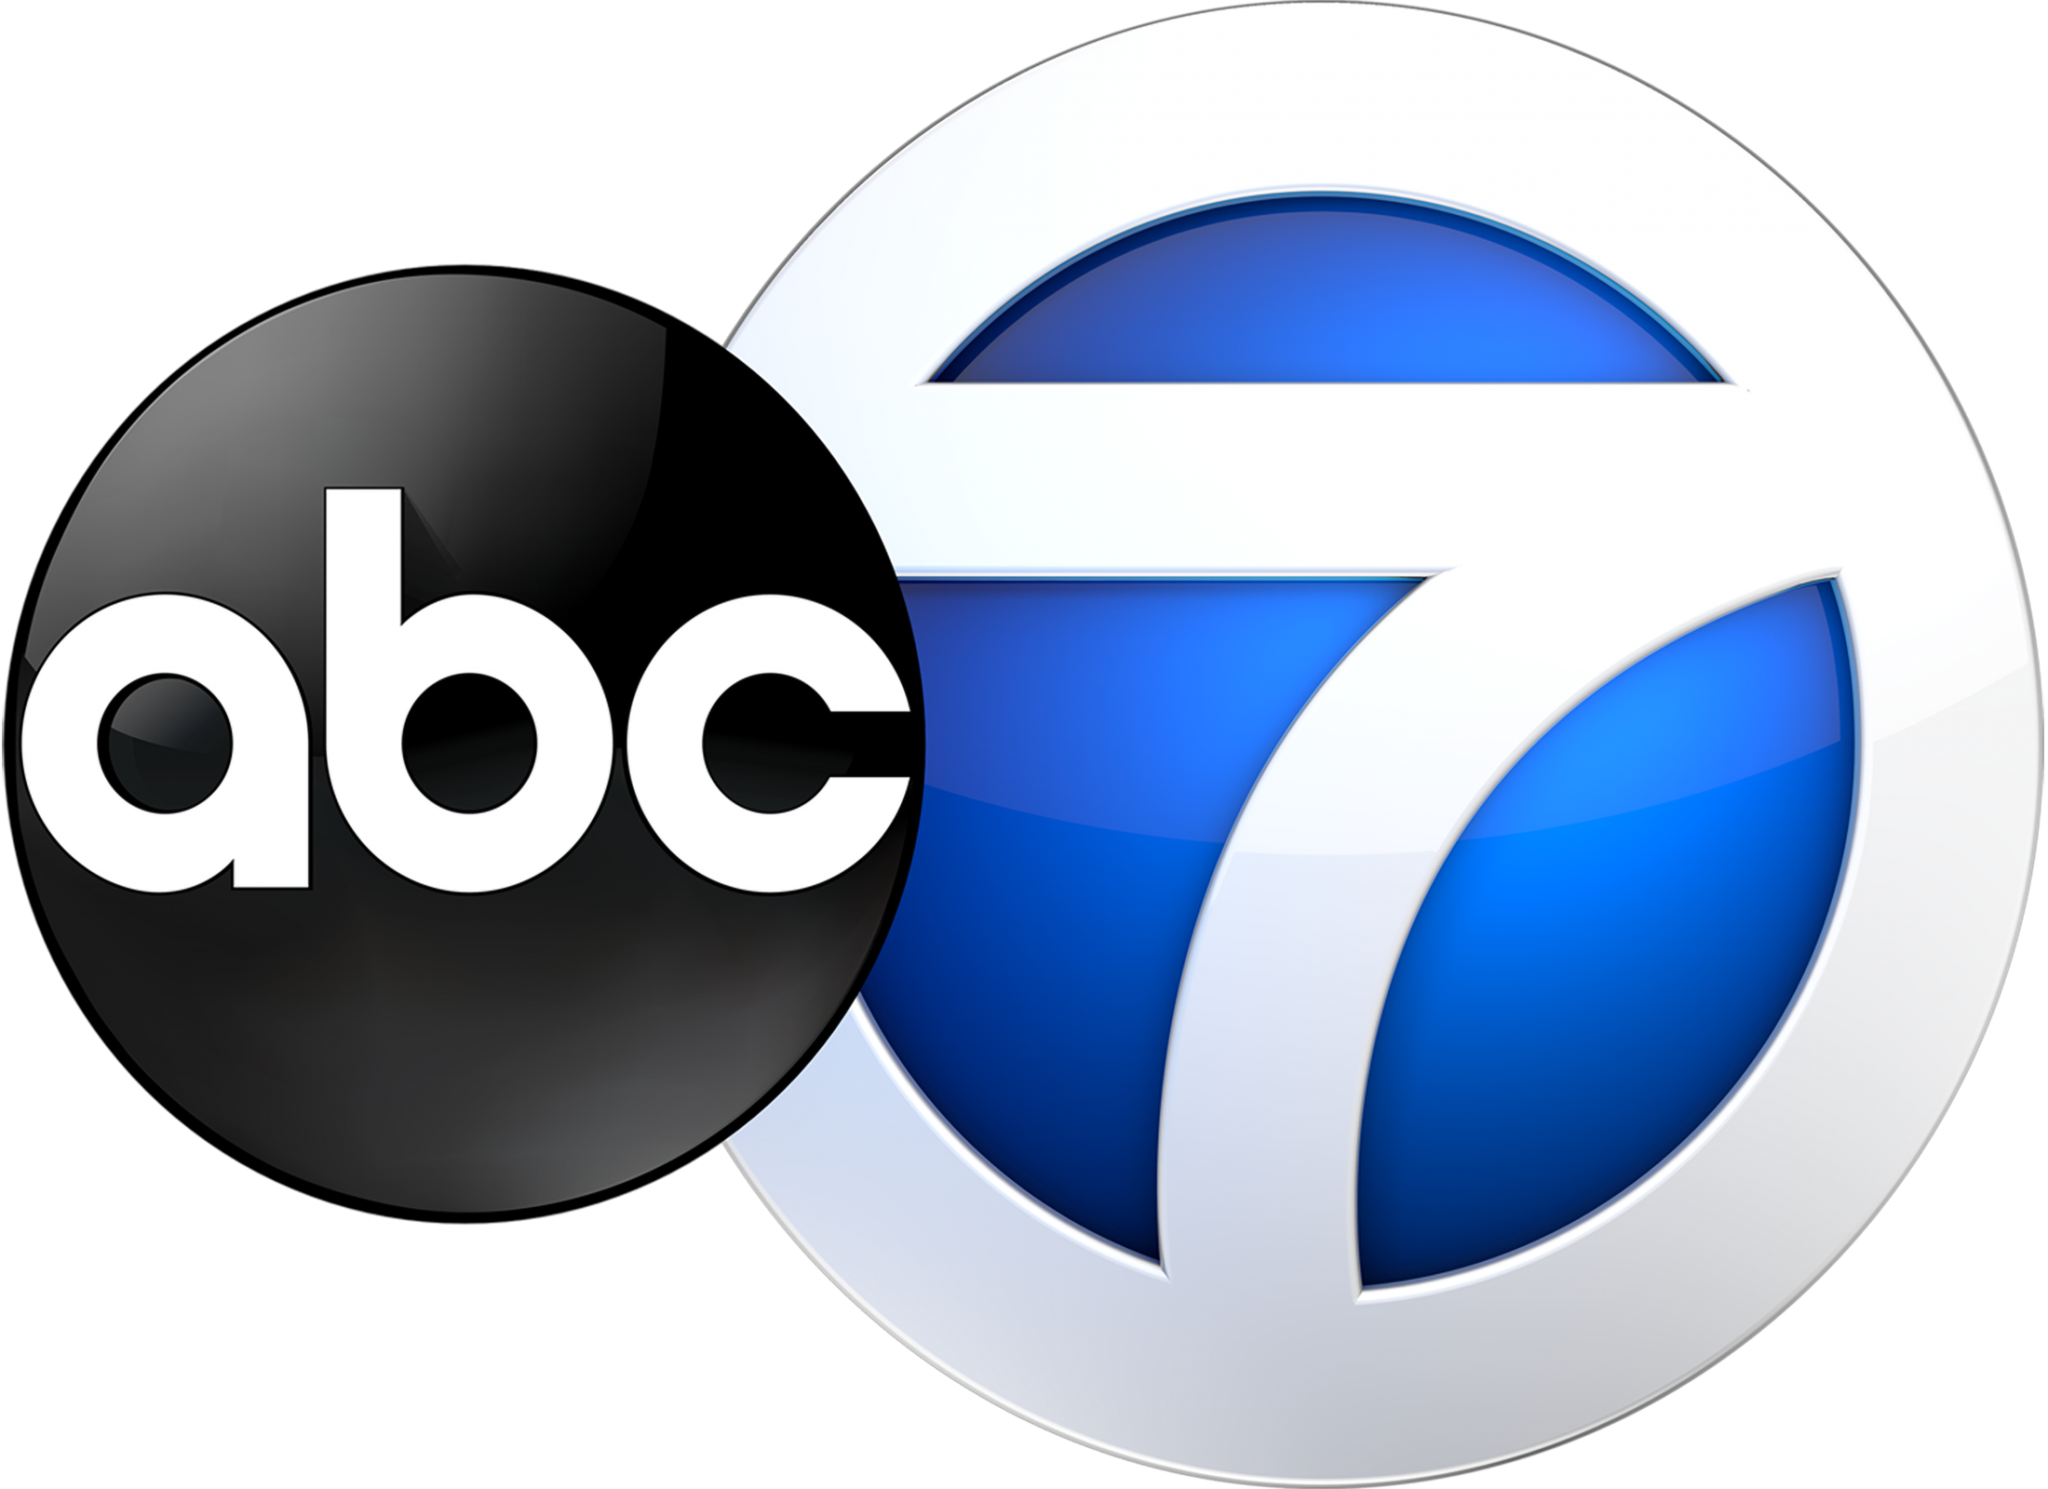 Abc 7 Chicago Eyewitness News Live Stream Weather And Anchors